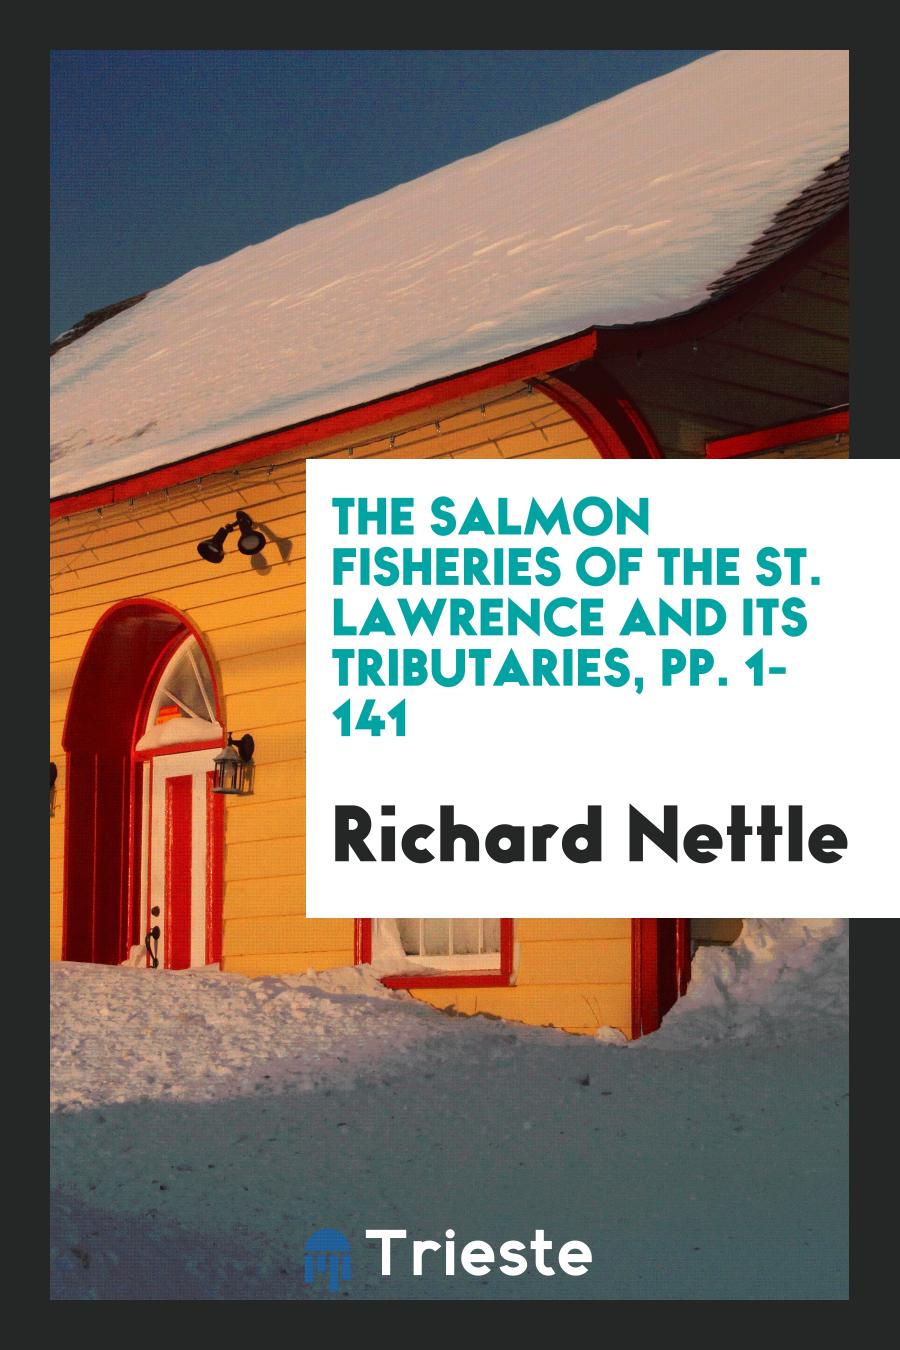 The Salmon Fisheries of the St. Lawrence and Its Tributaries, pp. 1-141